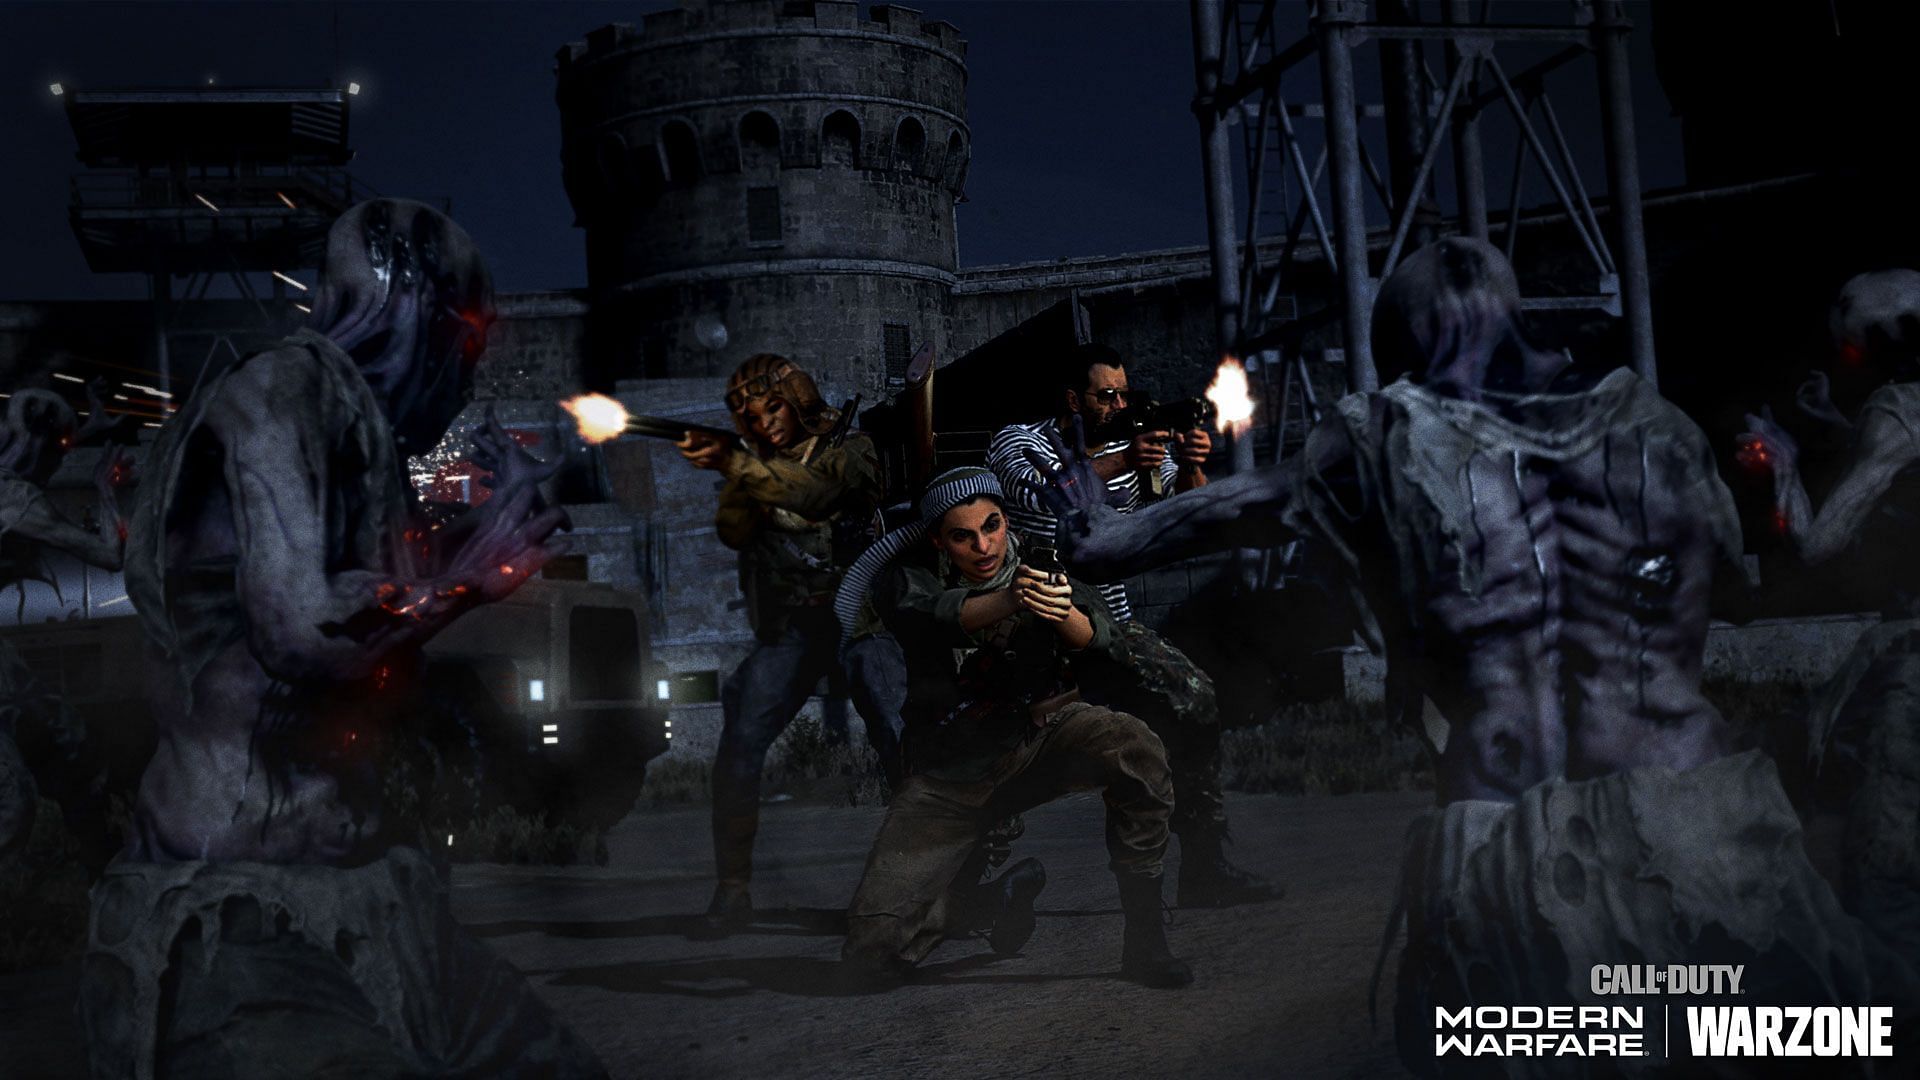 Zombies will come to Rebirth Island in Season 4 reloaded (image via Activision)